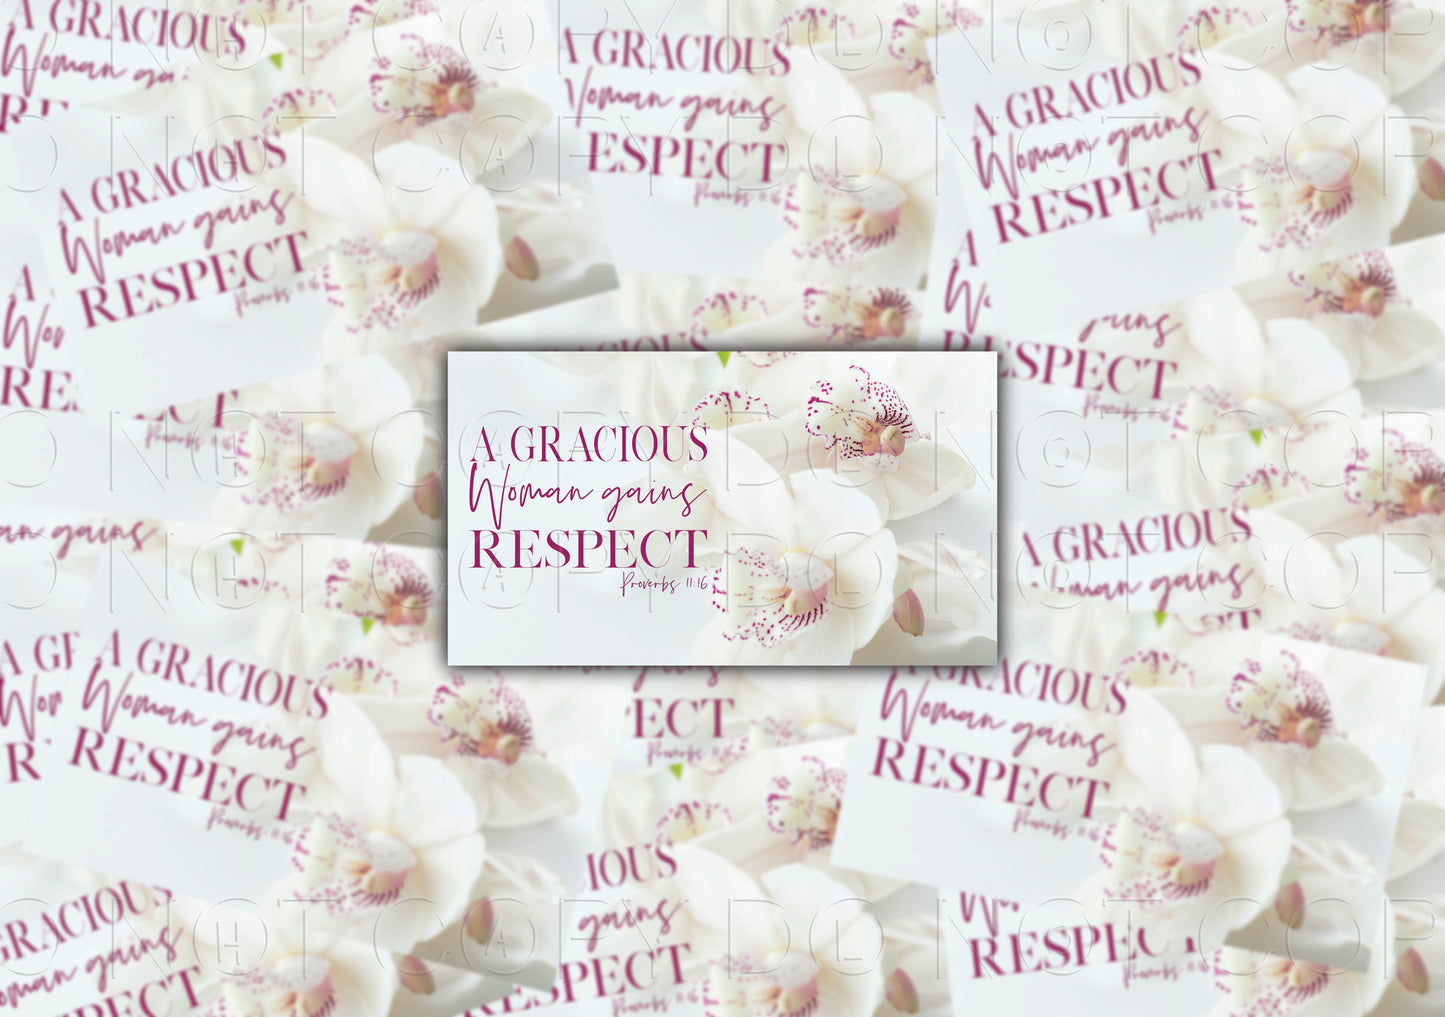 KINDNESS CARDS - PACK OF 100 - A GRACIOUS WOMAN GAINS RESPECT #6002